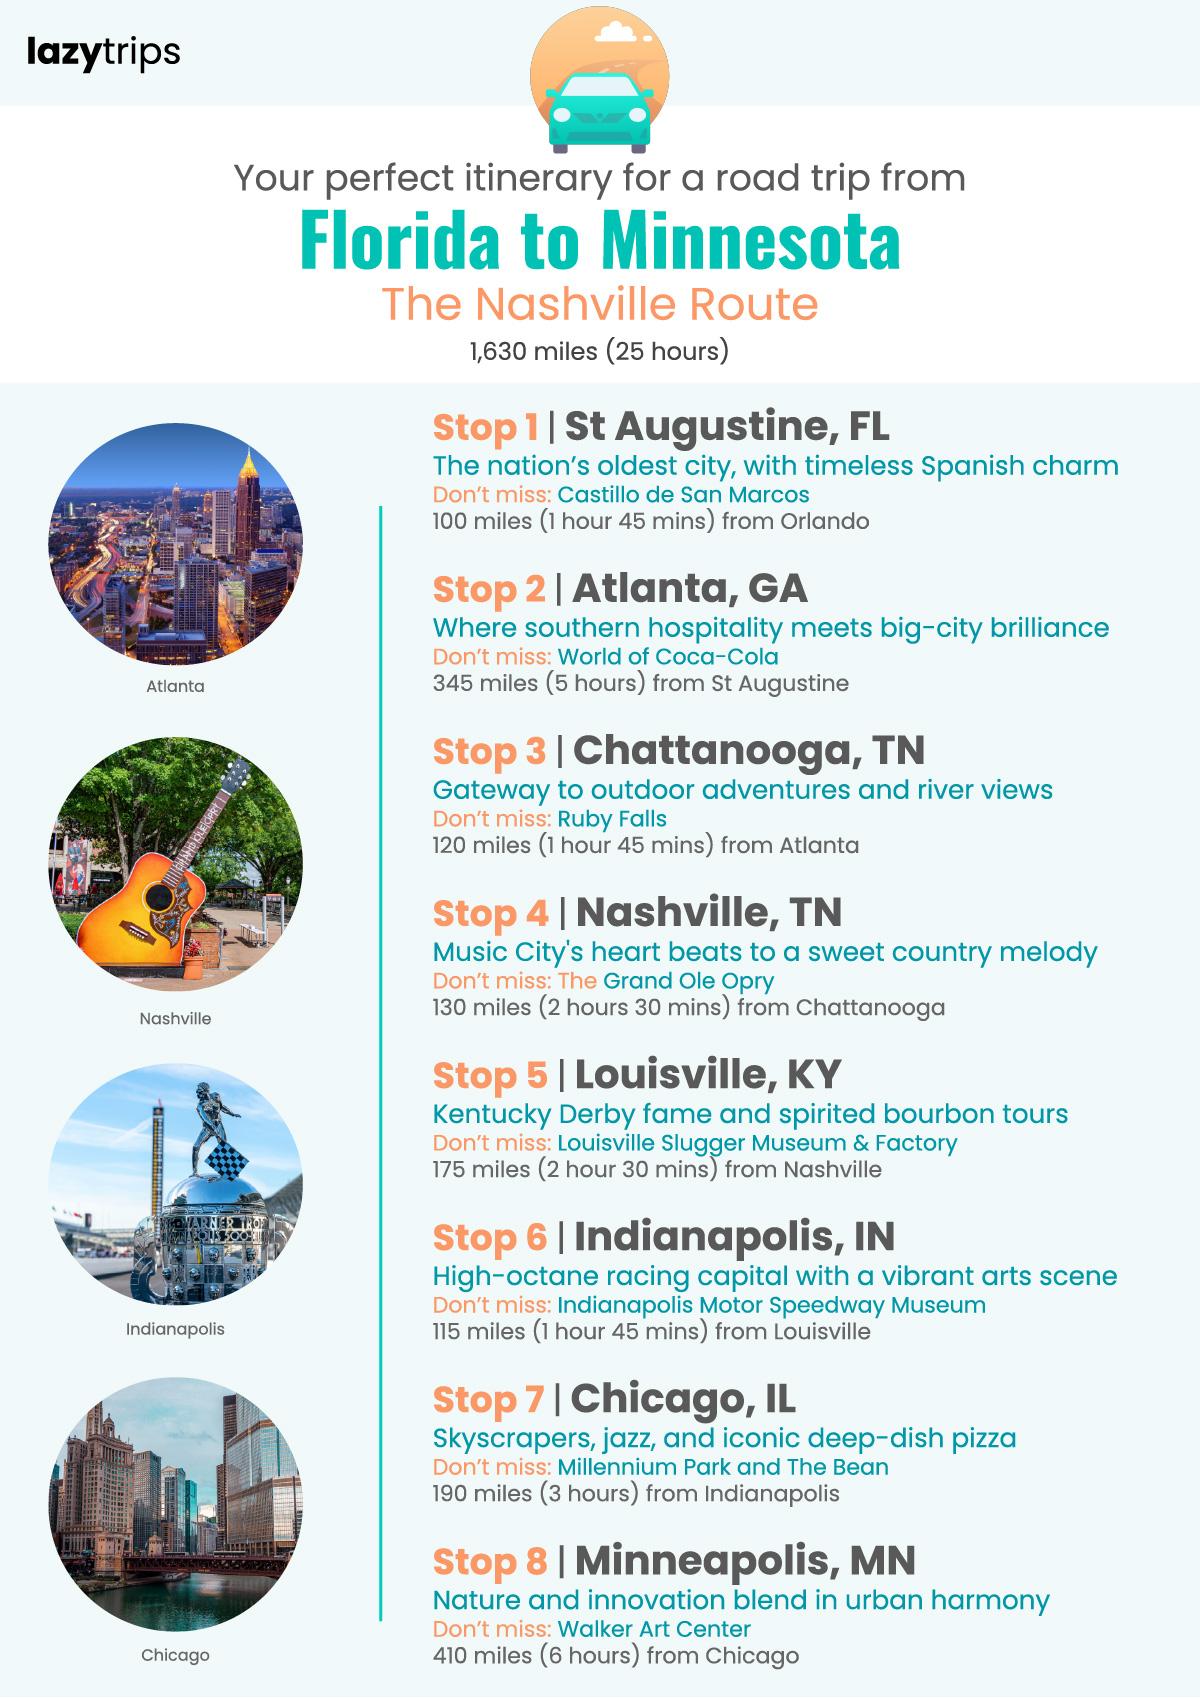 Itinerary for a road trip from Florida to Minnesota, showing via points: St Augustine, Atlanta, Chattanooga, Nashville, Louisville, Indianapolis, Chicago and Minneapolis